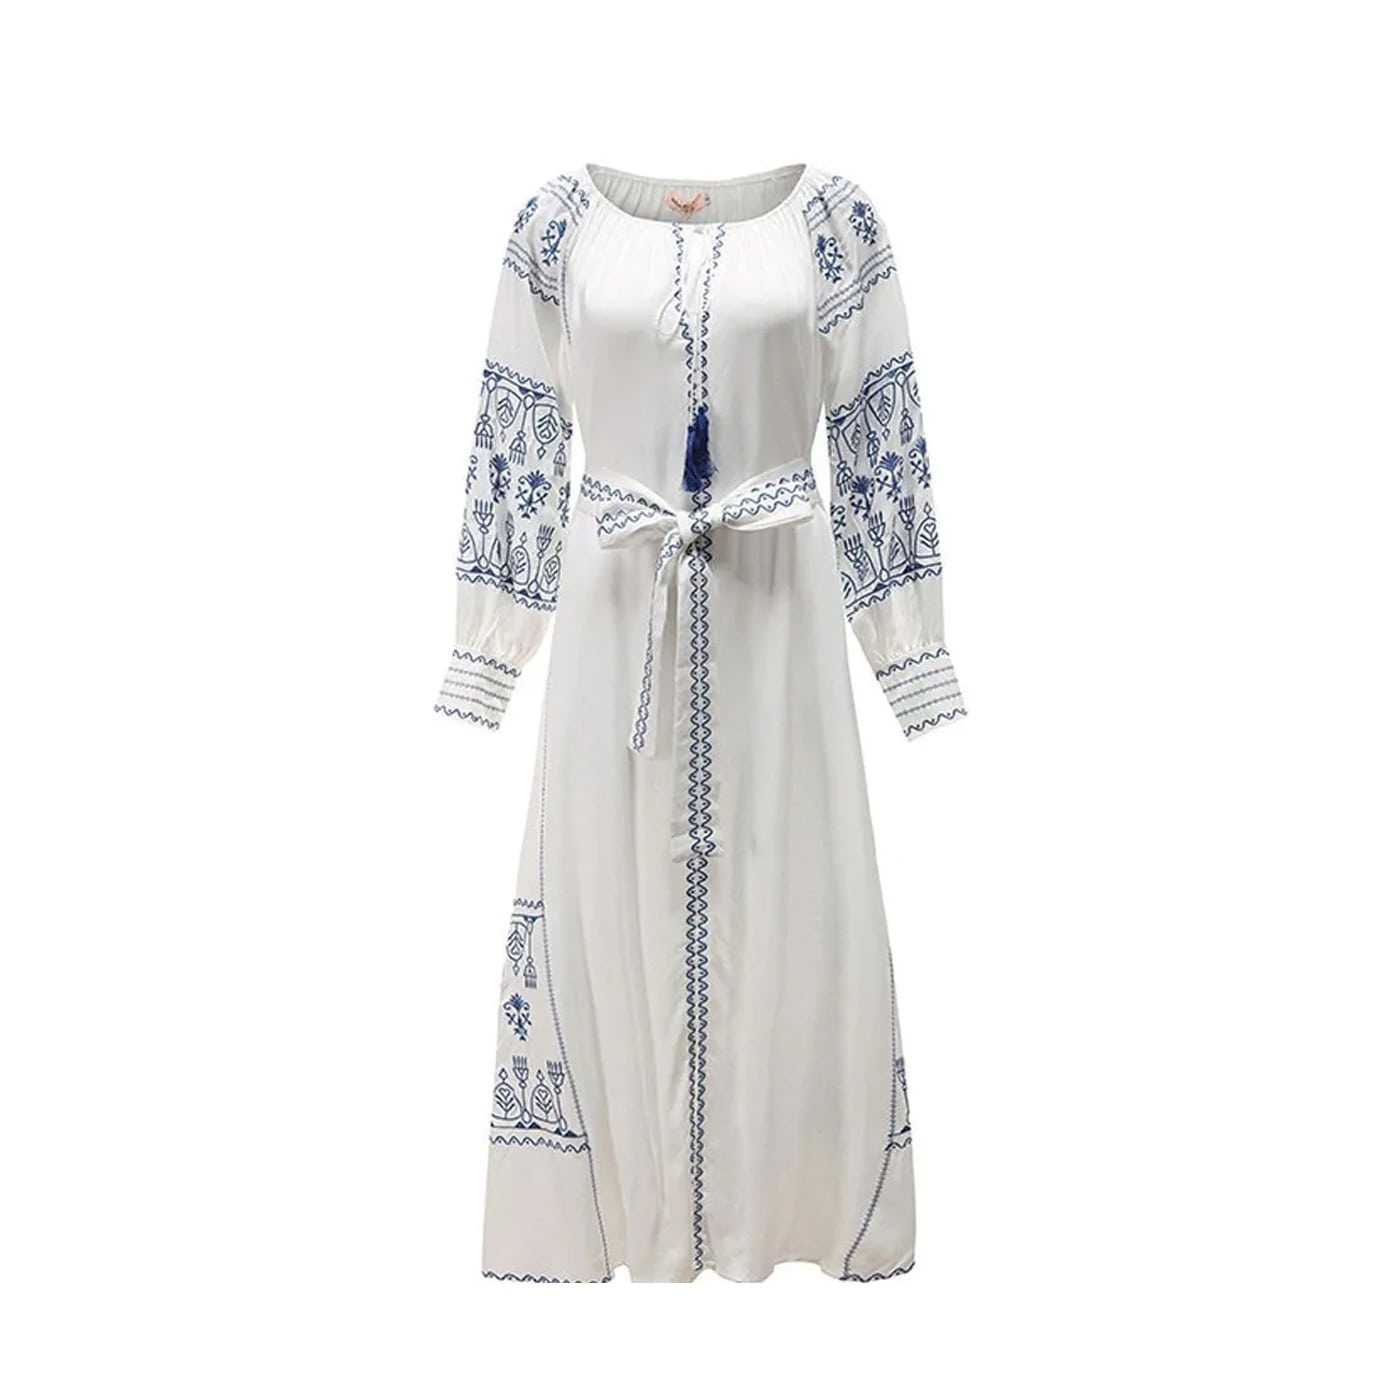 White Dress with Blue Embroidery